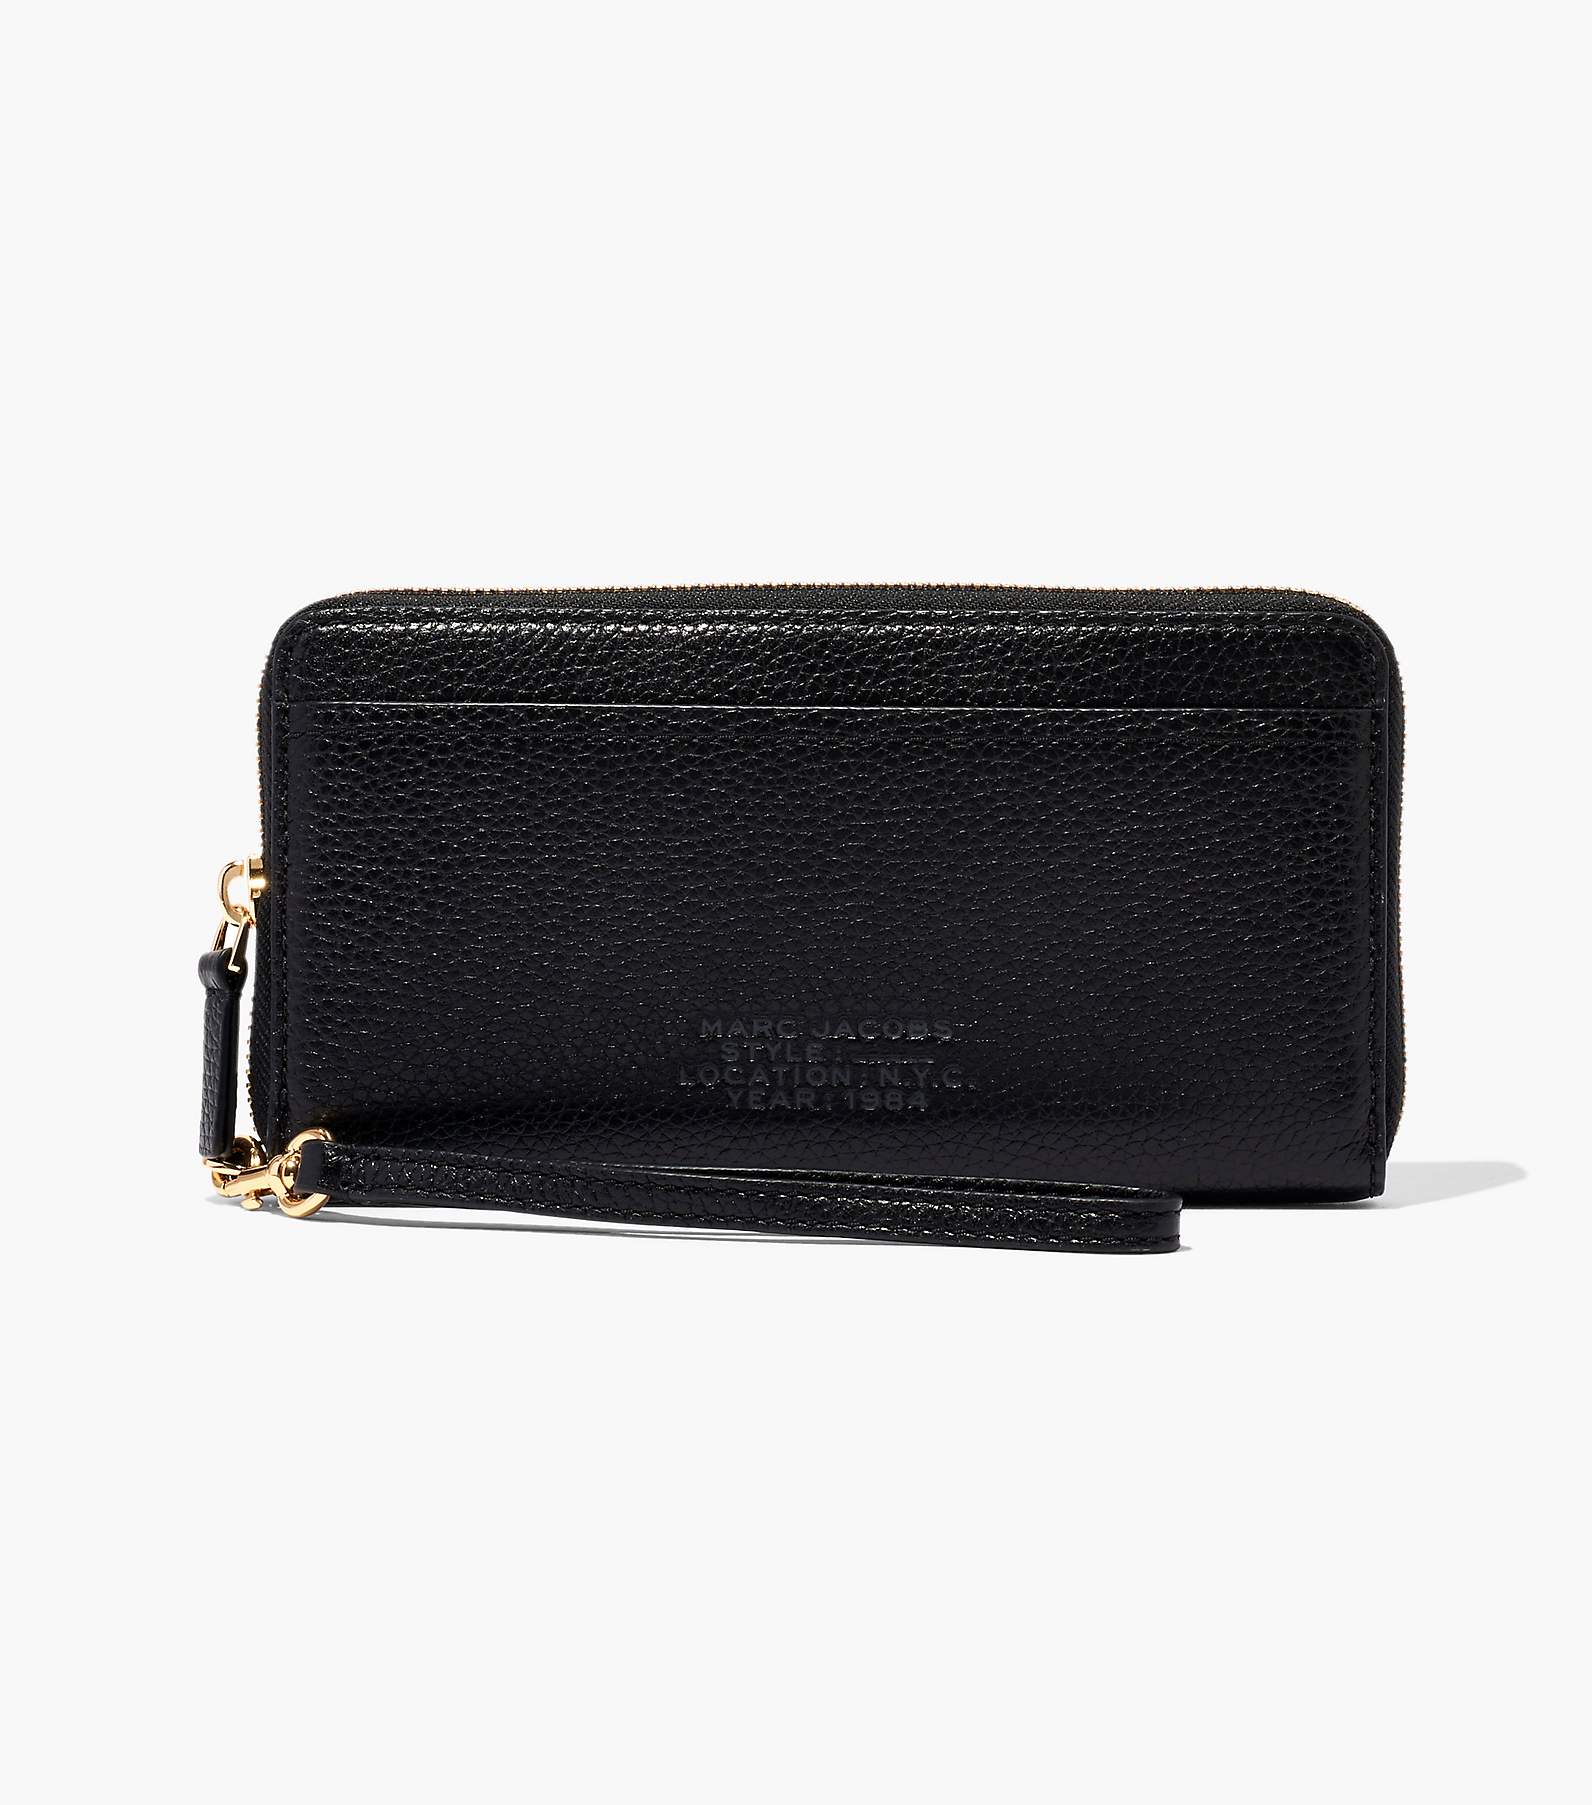 Marc Jacobs Women's The Continental Leather Wallet